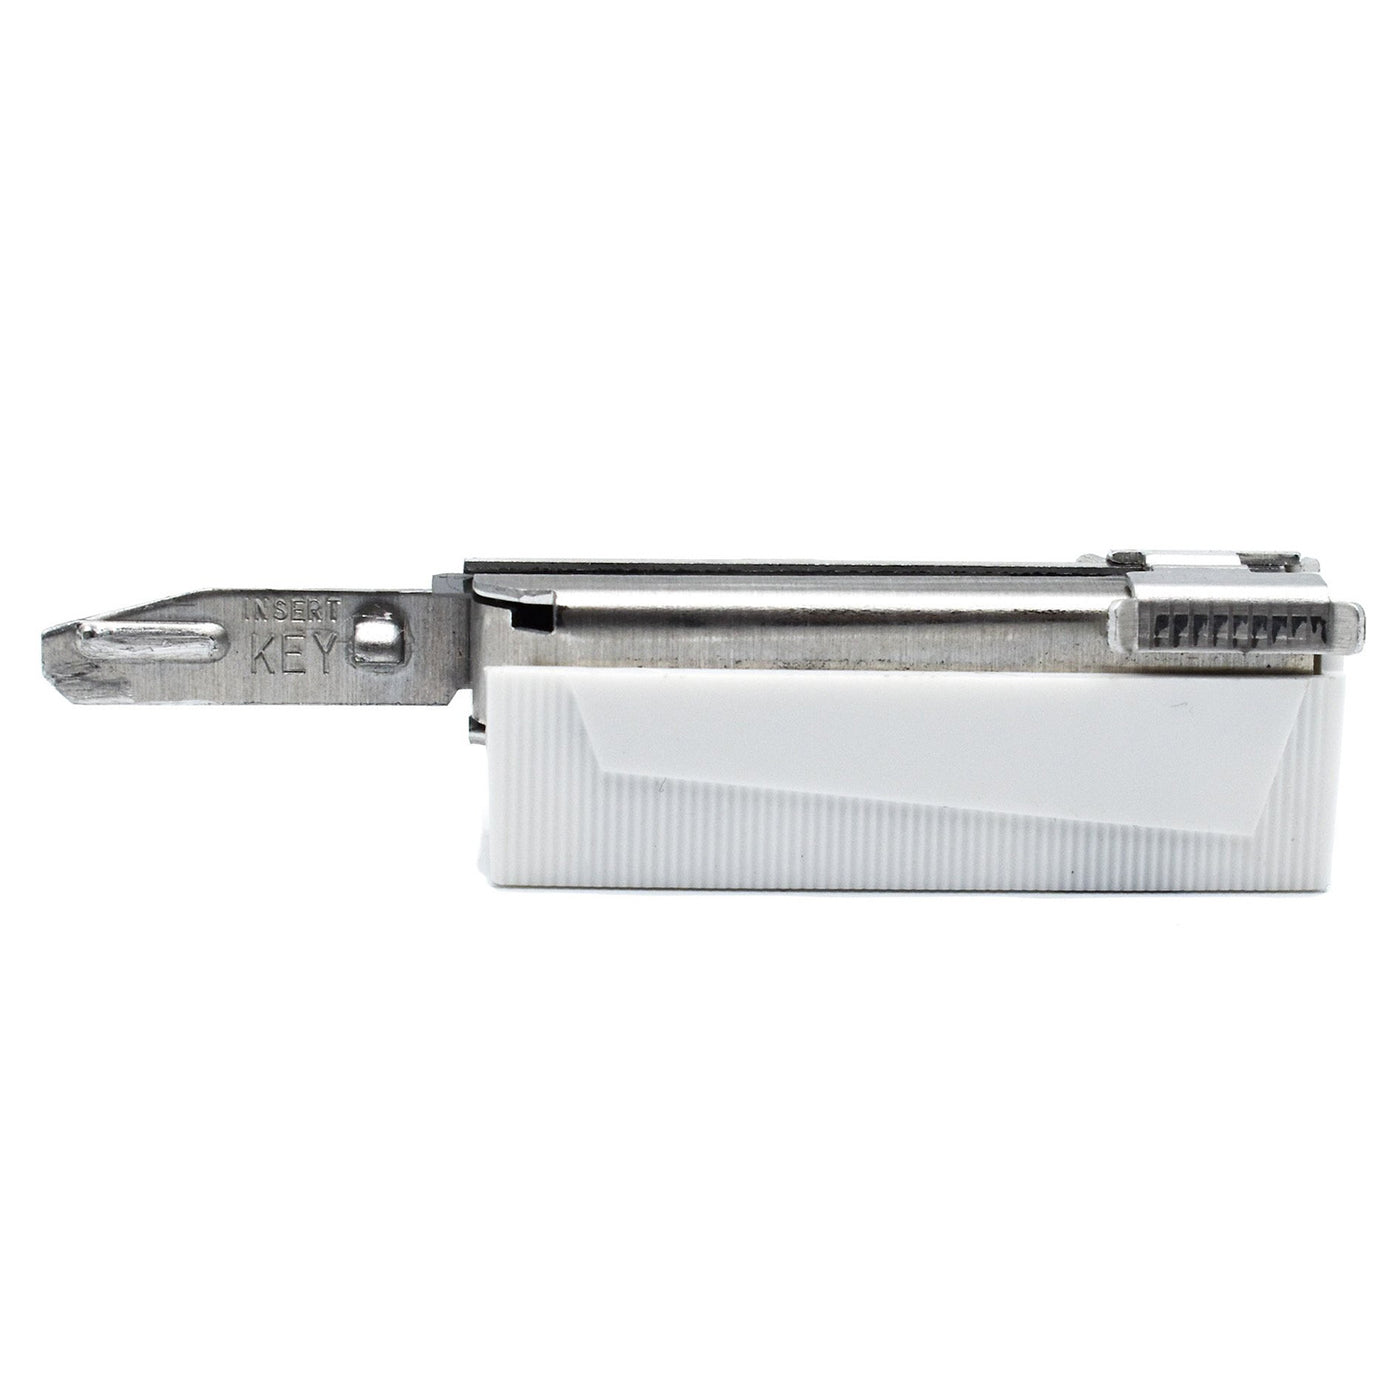  Parker Injector Blades by Parker sold by Naked Armor Razors